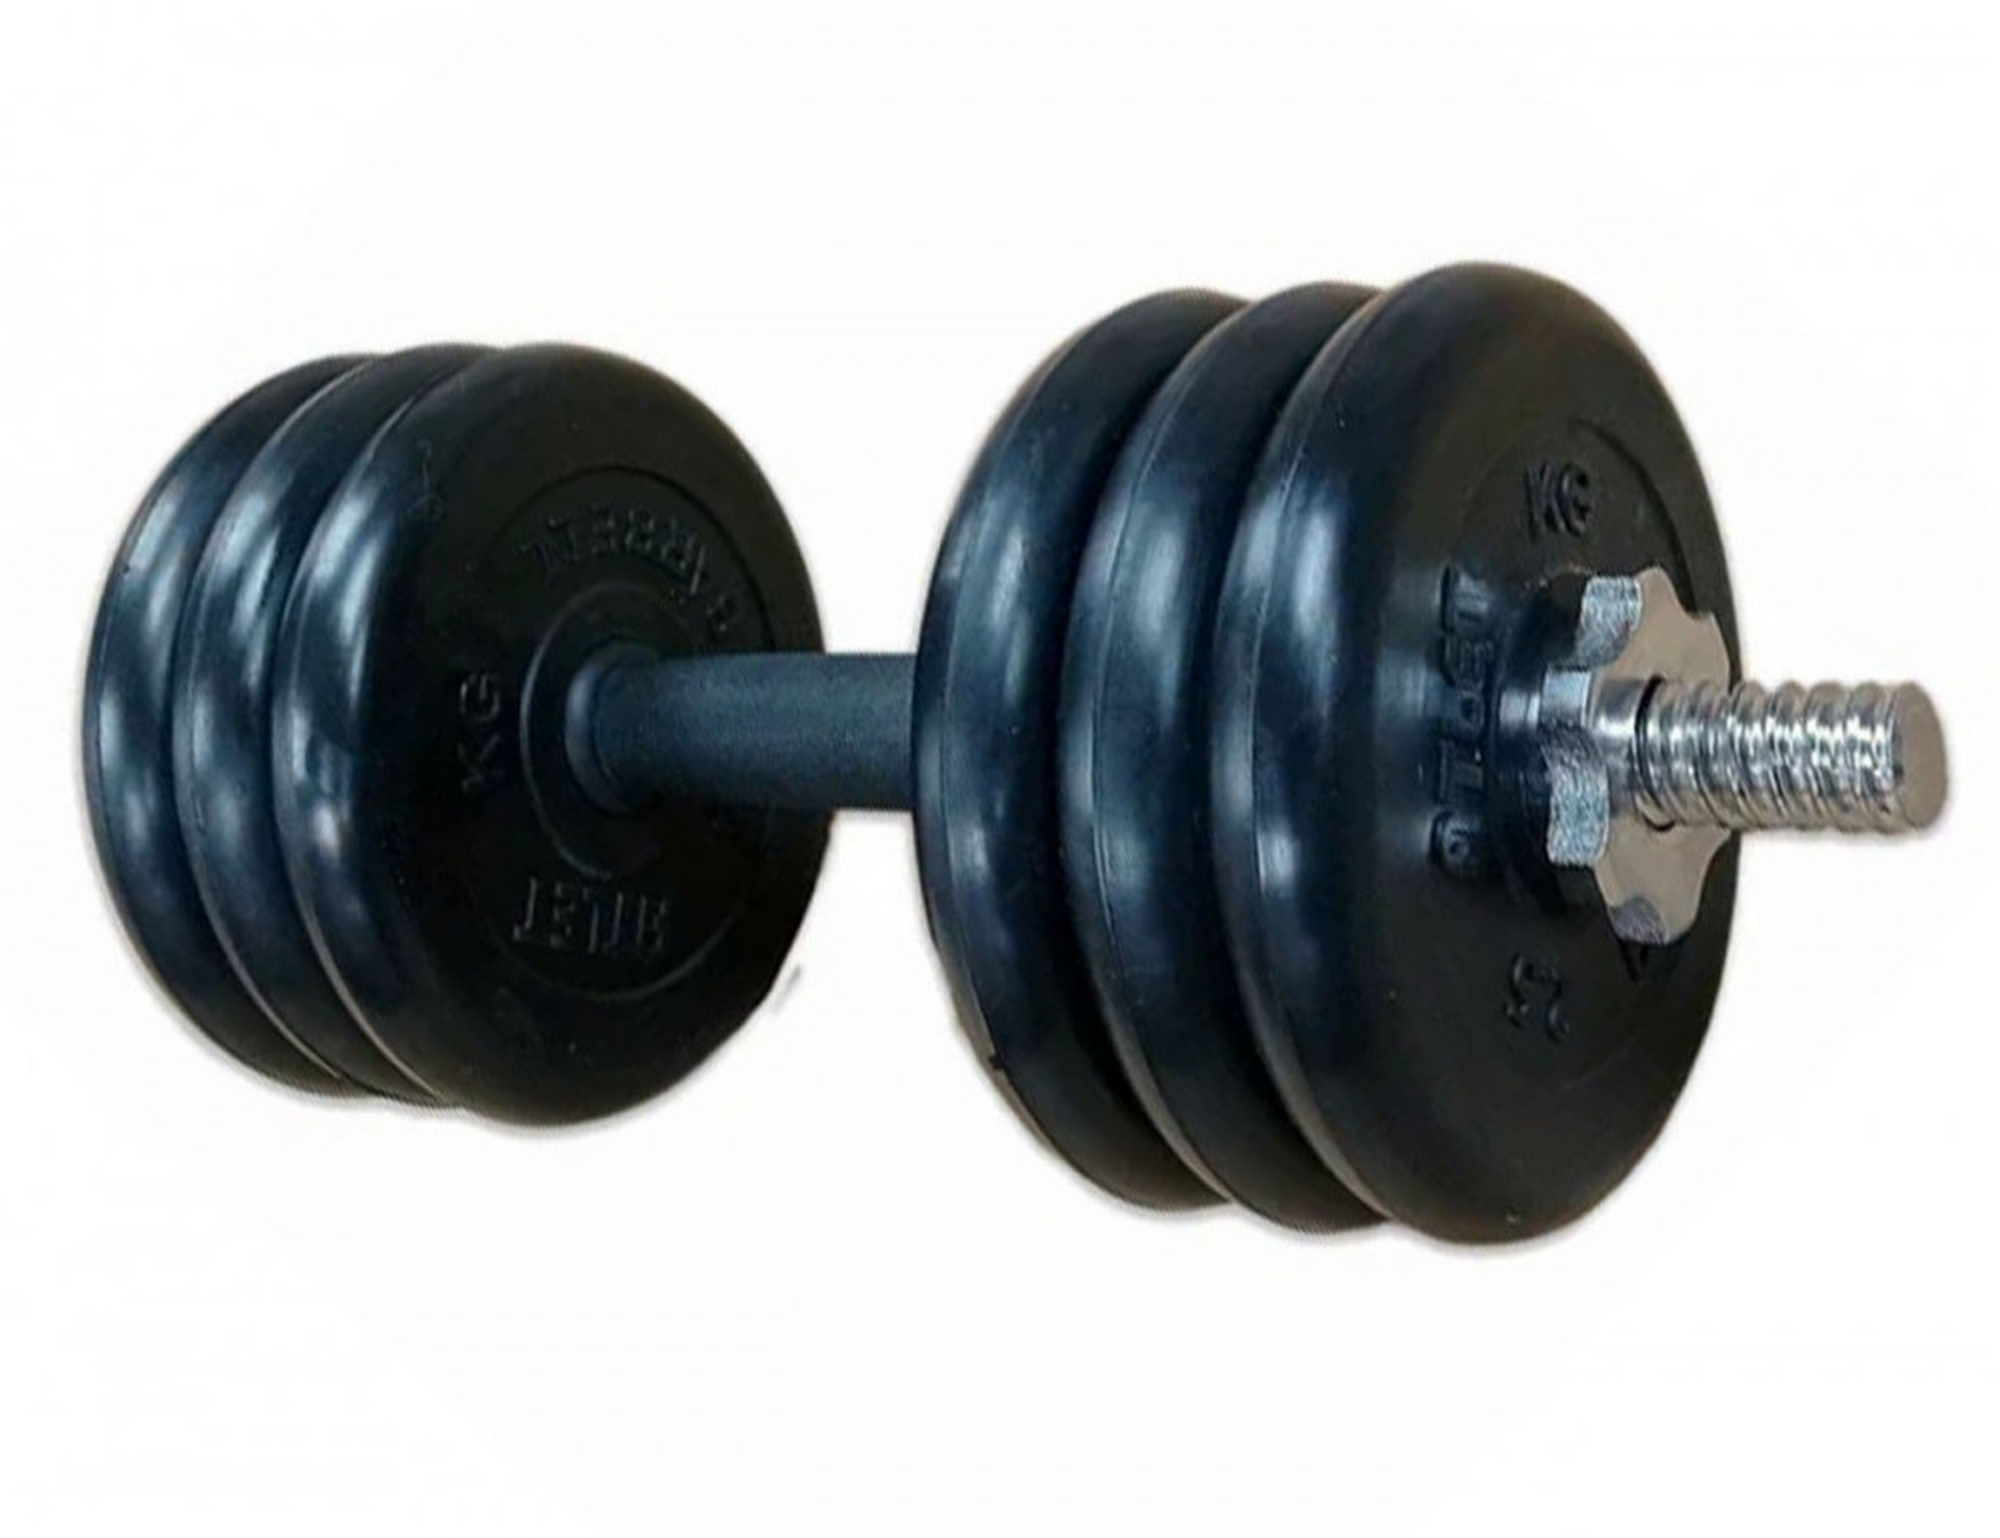   16, 5 (6x2.5) MB Barbell  -16, 5 (6*2.5)